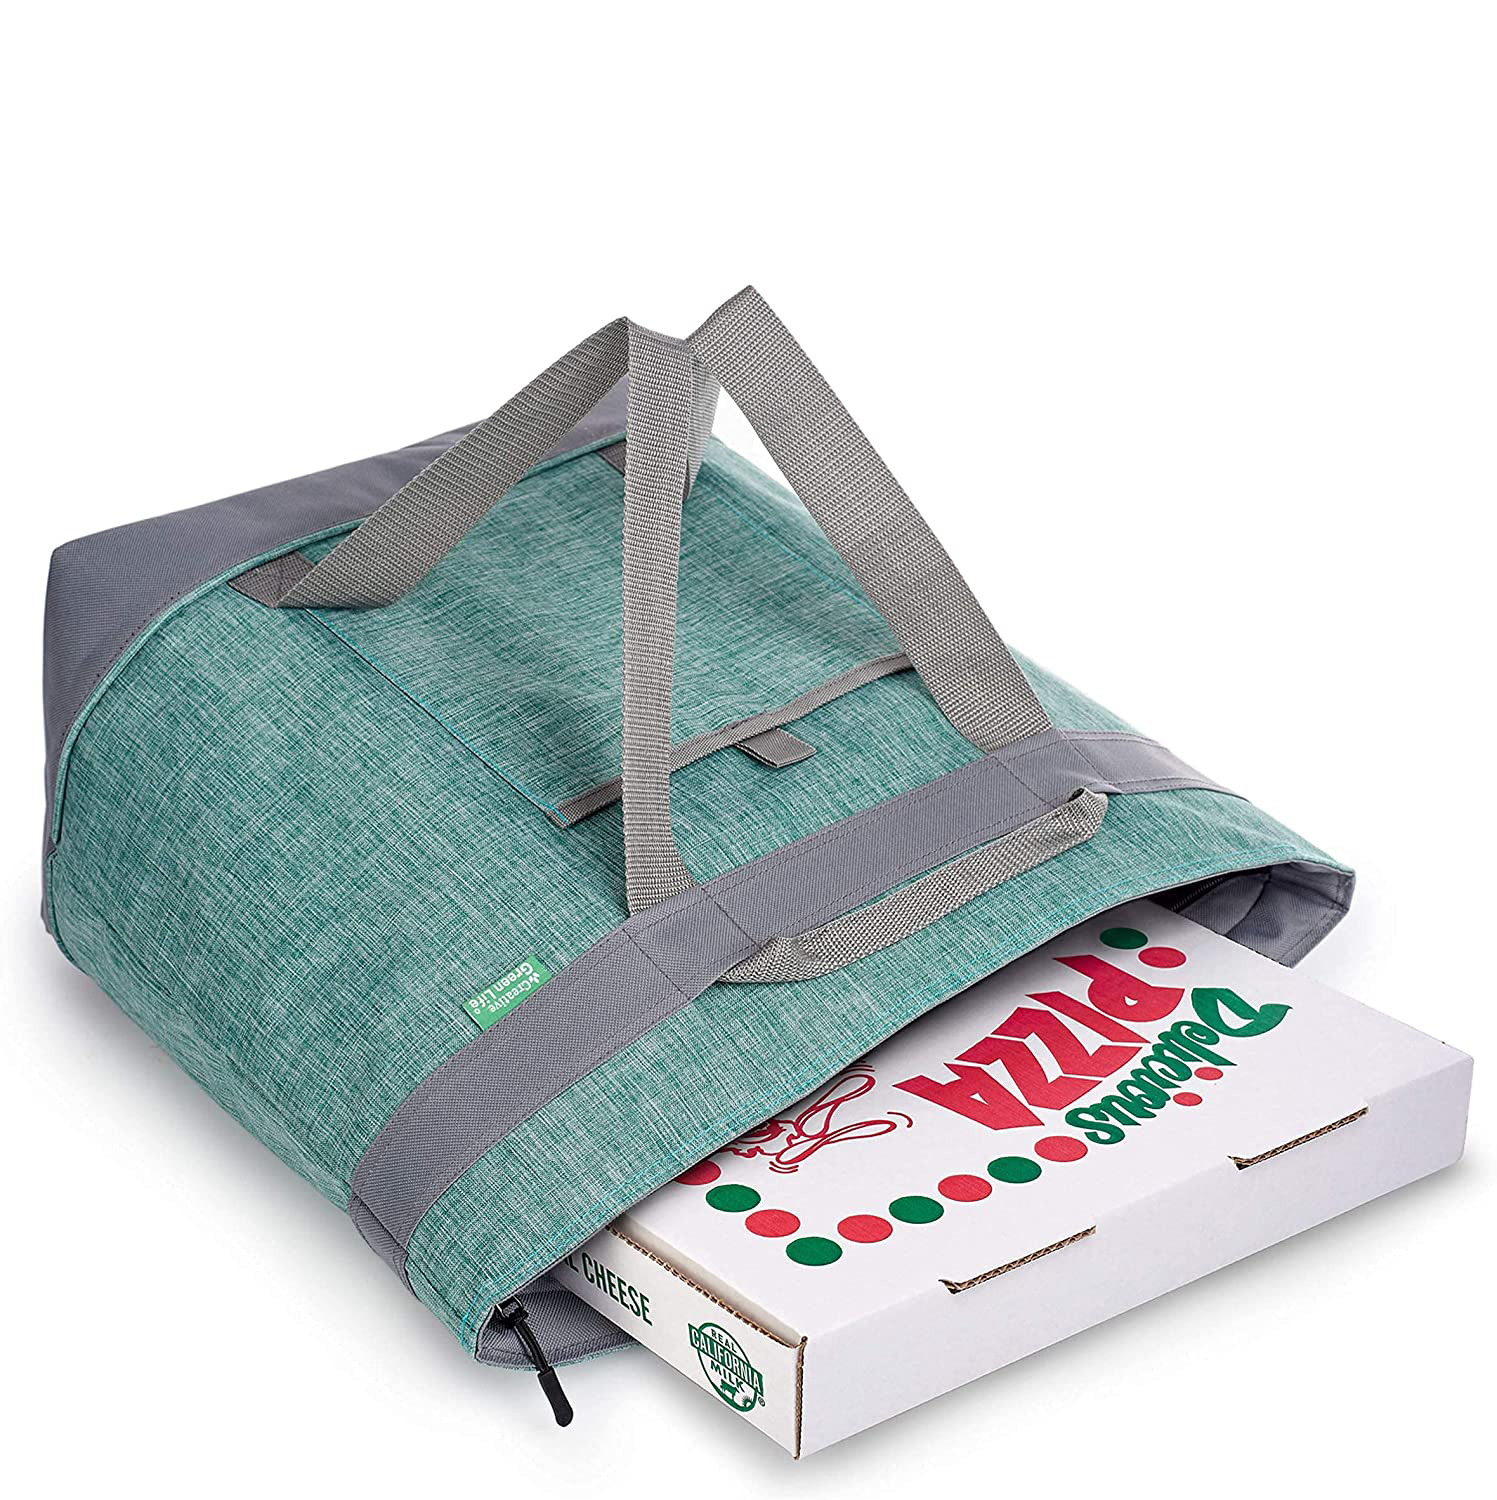 Premium Quality Soft Cooler Makes a Perfect Insulated Grocery Bag Good for Food Delivery Travel Beach Work School